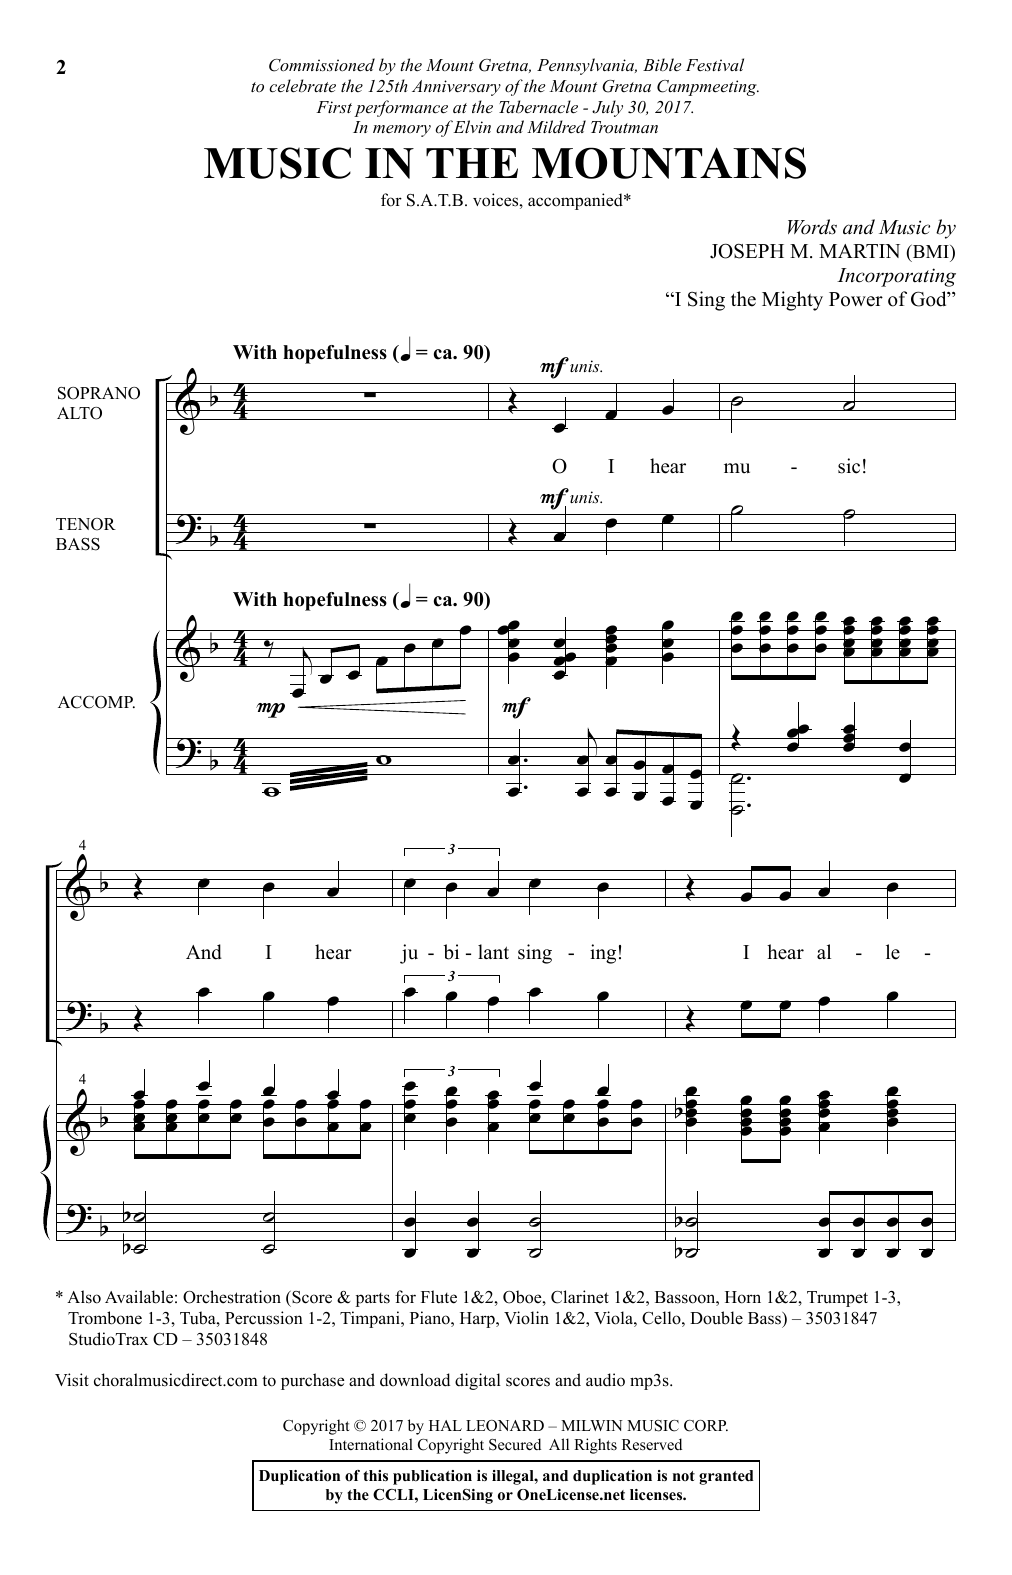 Joseph M. Martin Music In The Mountains sheet music notes and chords. Download Printable PDF.